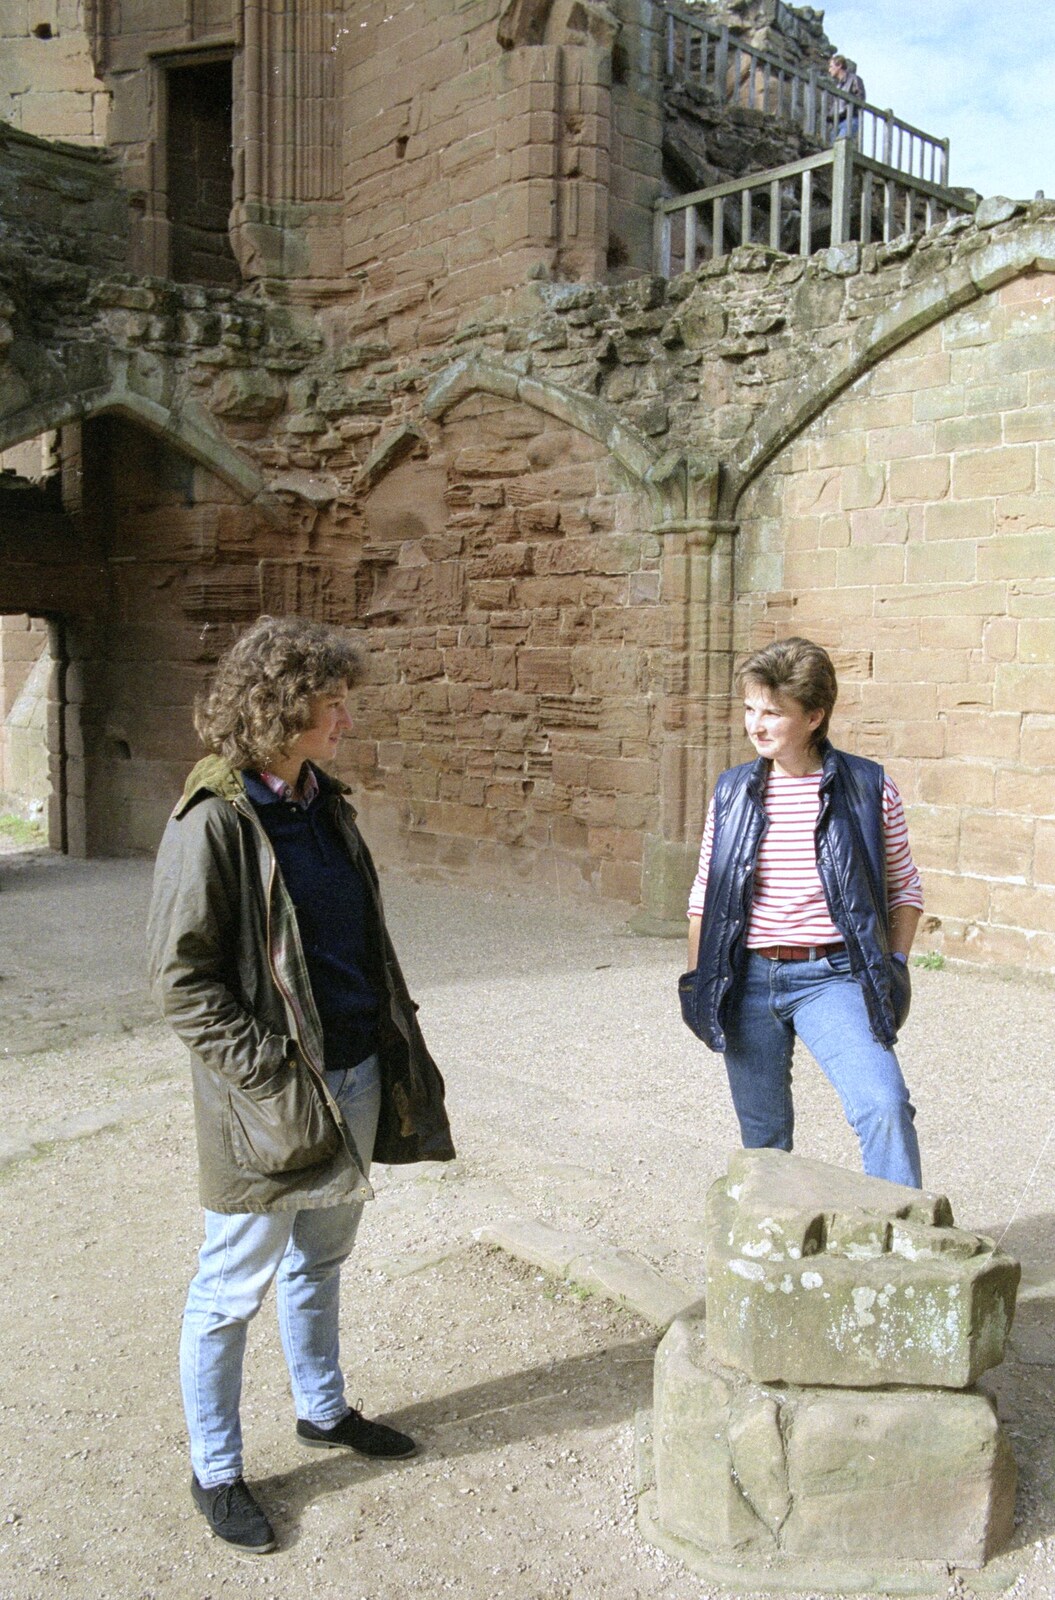 Angela and her chum roam around the castle from A Trip to Kenilworth, Warwickshire - 21st September 1989